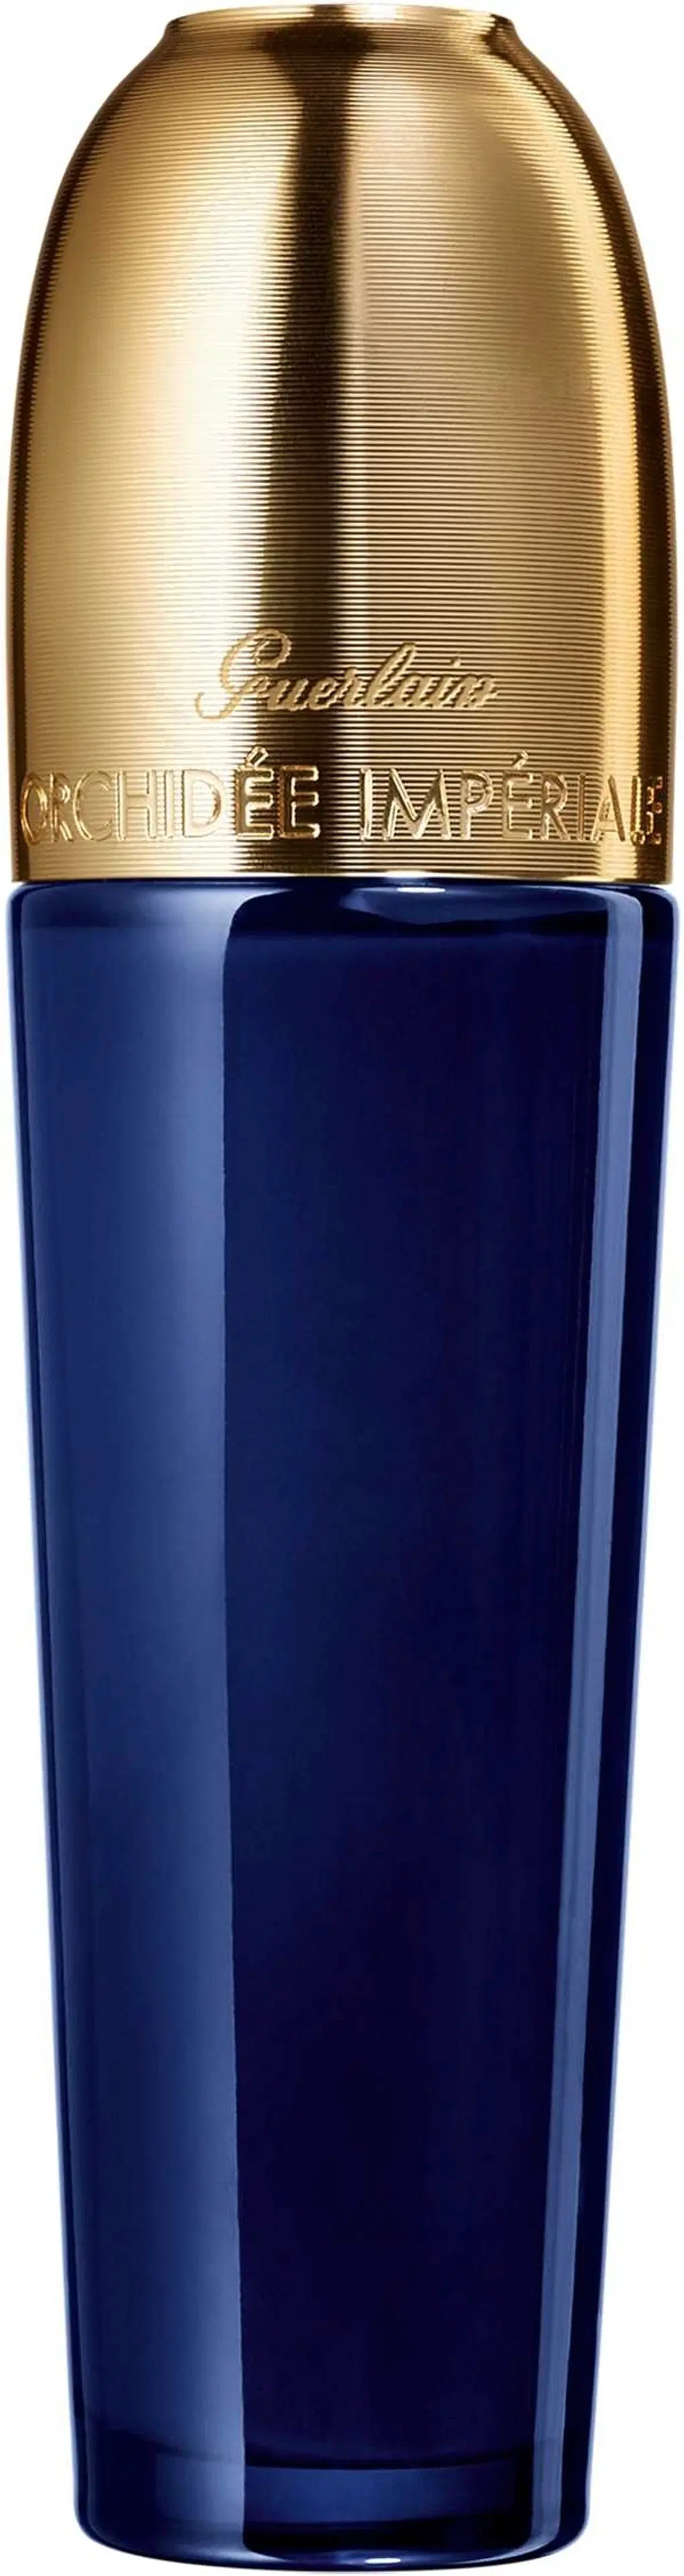 Guerlain Orchidee Imperiale 125ml Essence-In-Lotion